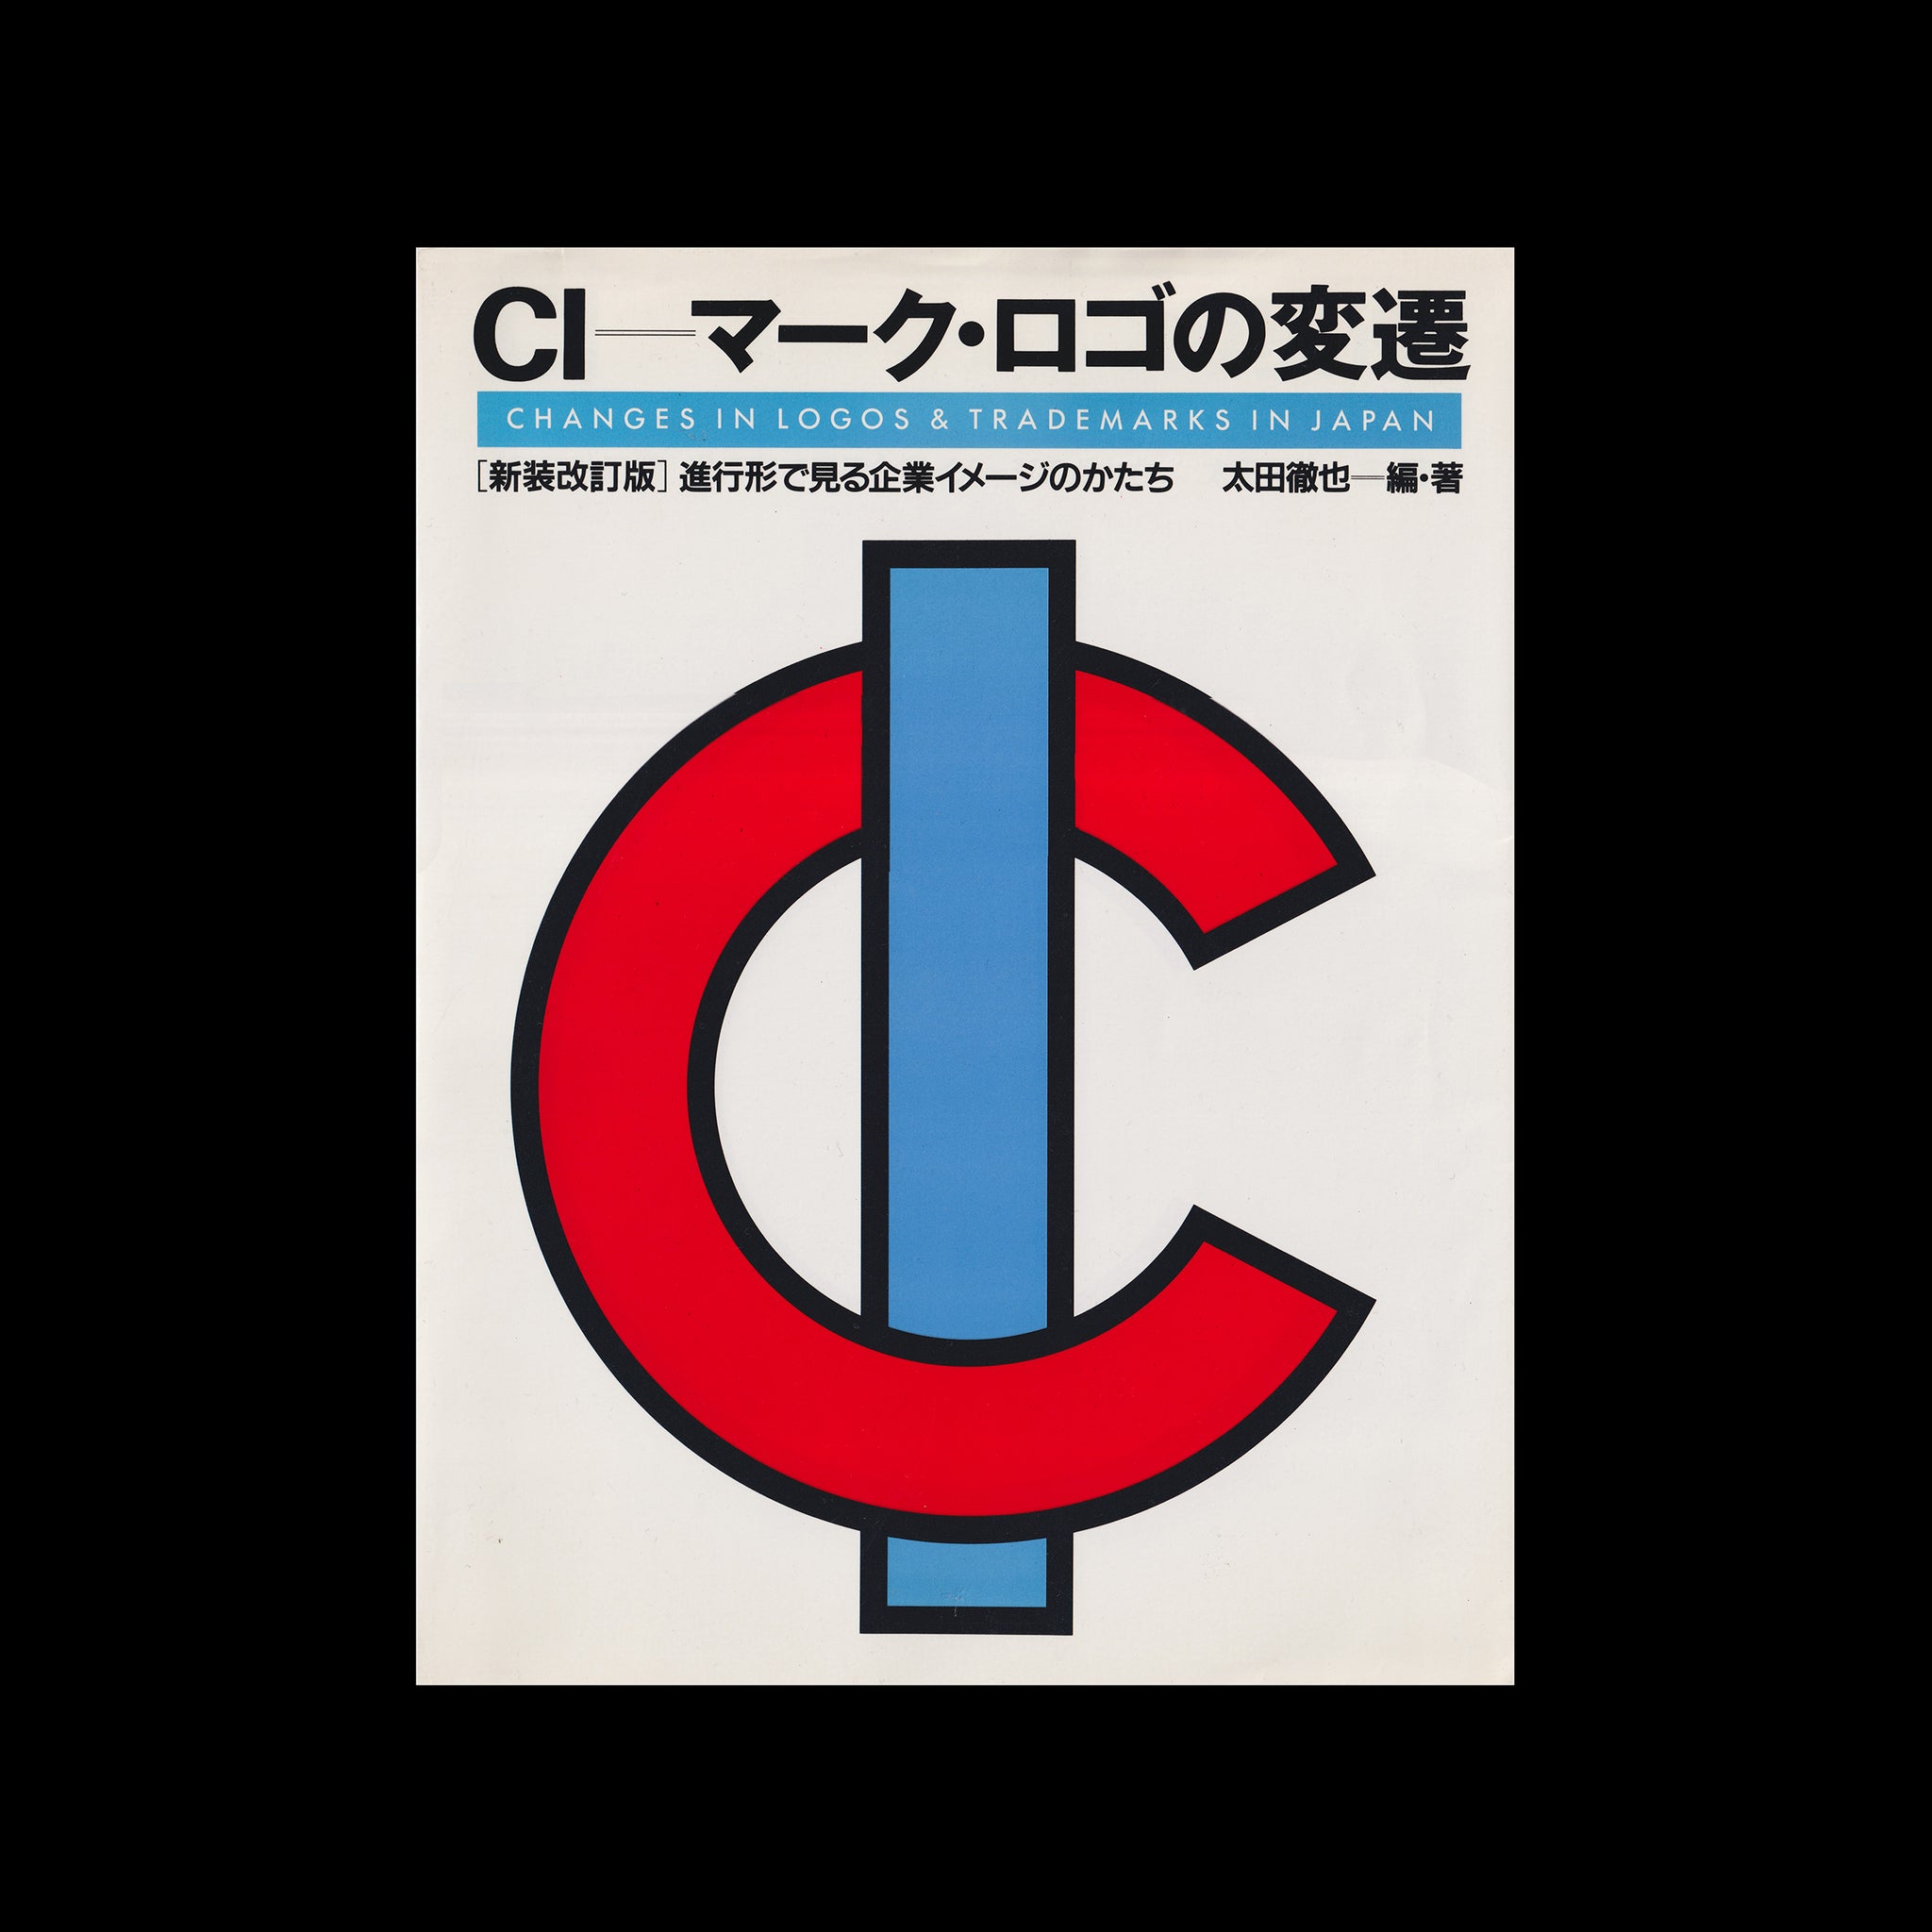 Changes in Logos & Trademarks in Japan, 1989